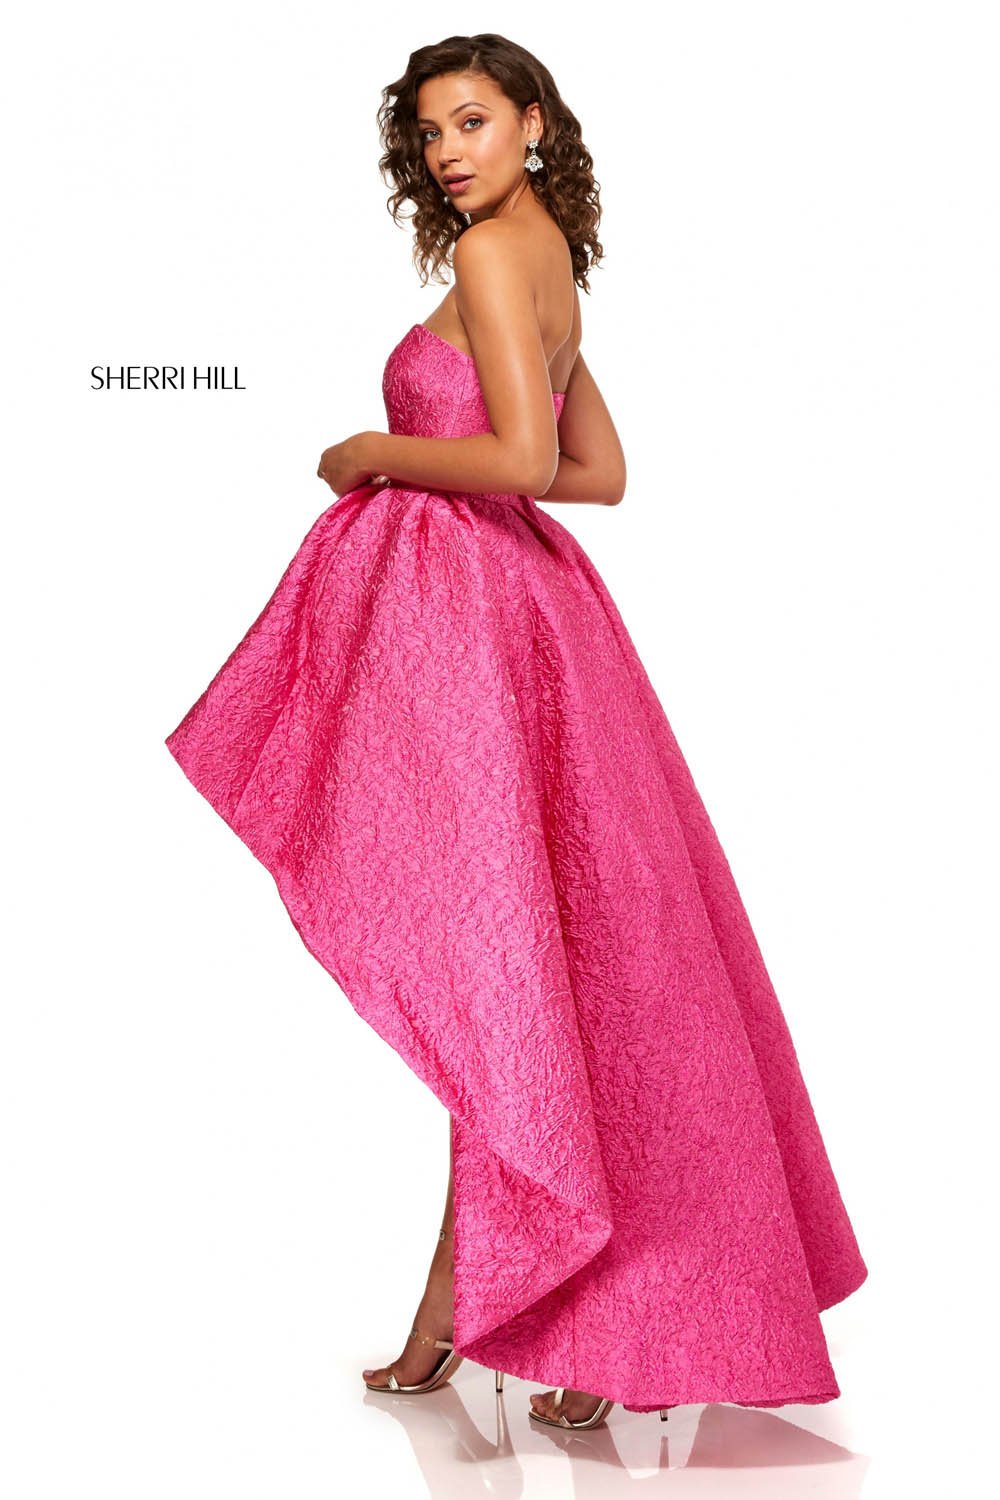 Sherri Hill 52418 dress images in these colors: Pink, Red, Black, Ivory, Periwinkle, Rose.